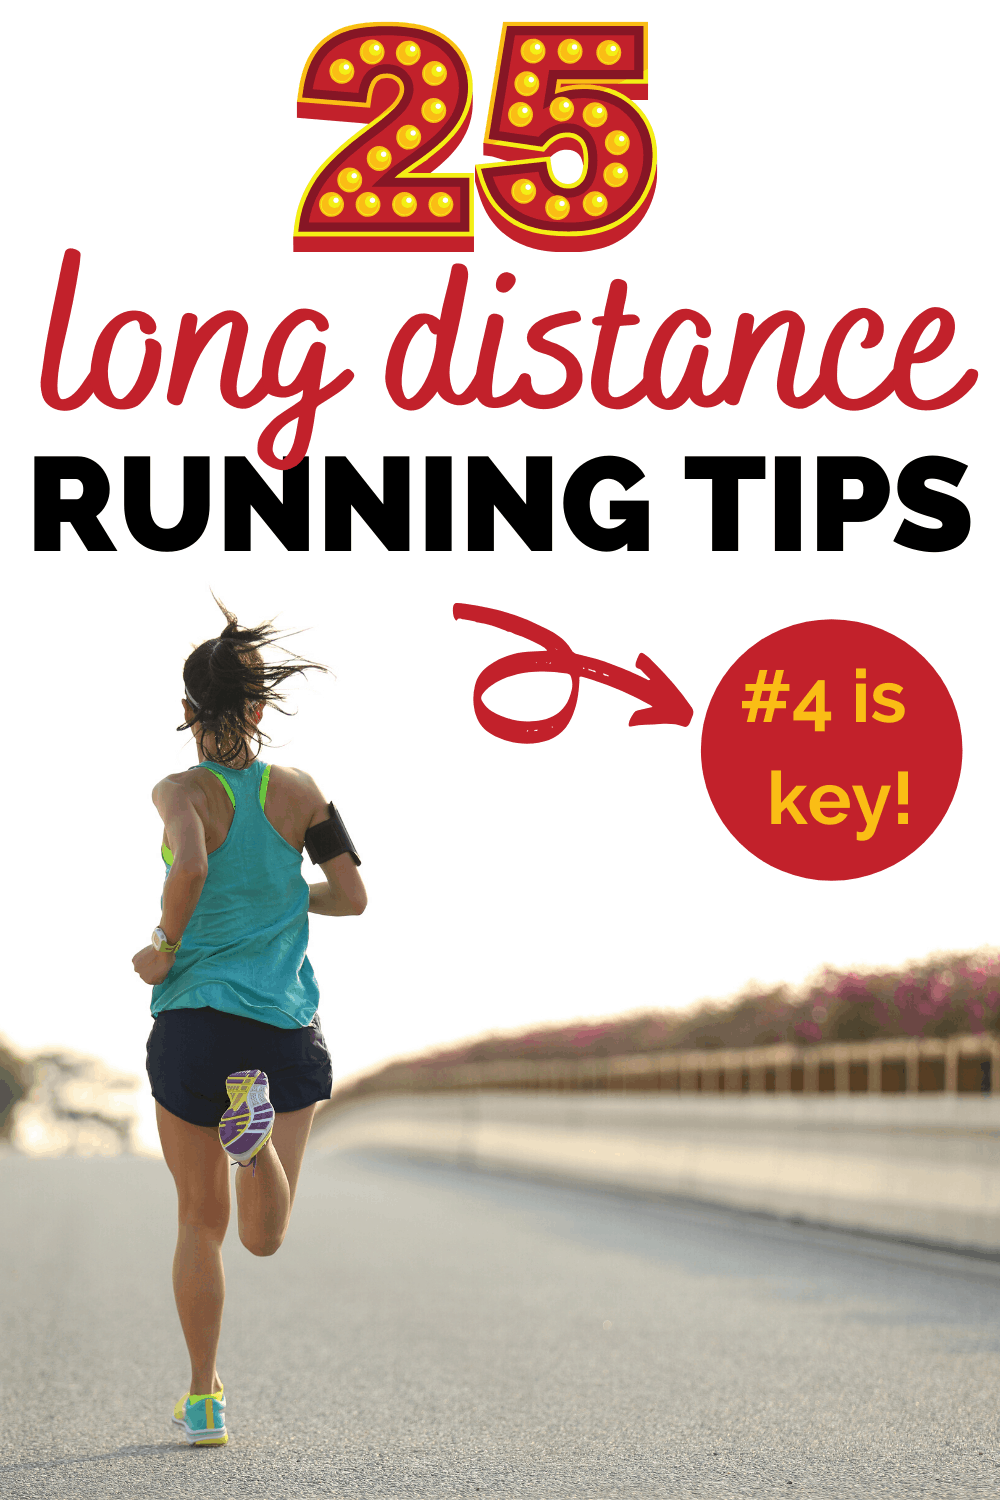 https://www.snackinginsneakers.com/wp-content/uploads/2020/06/Distance-Running-Tips.png